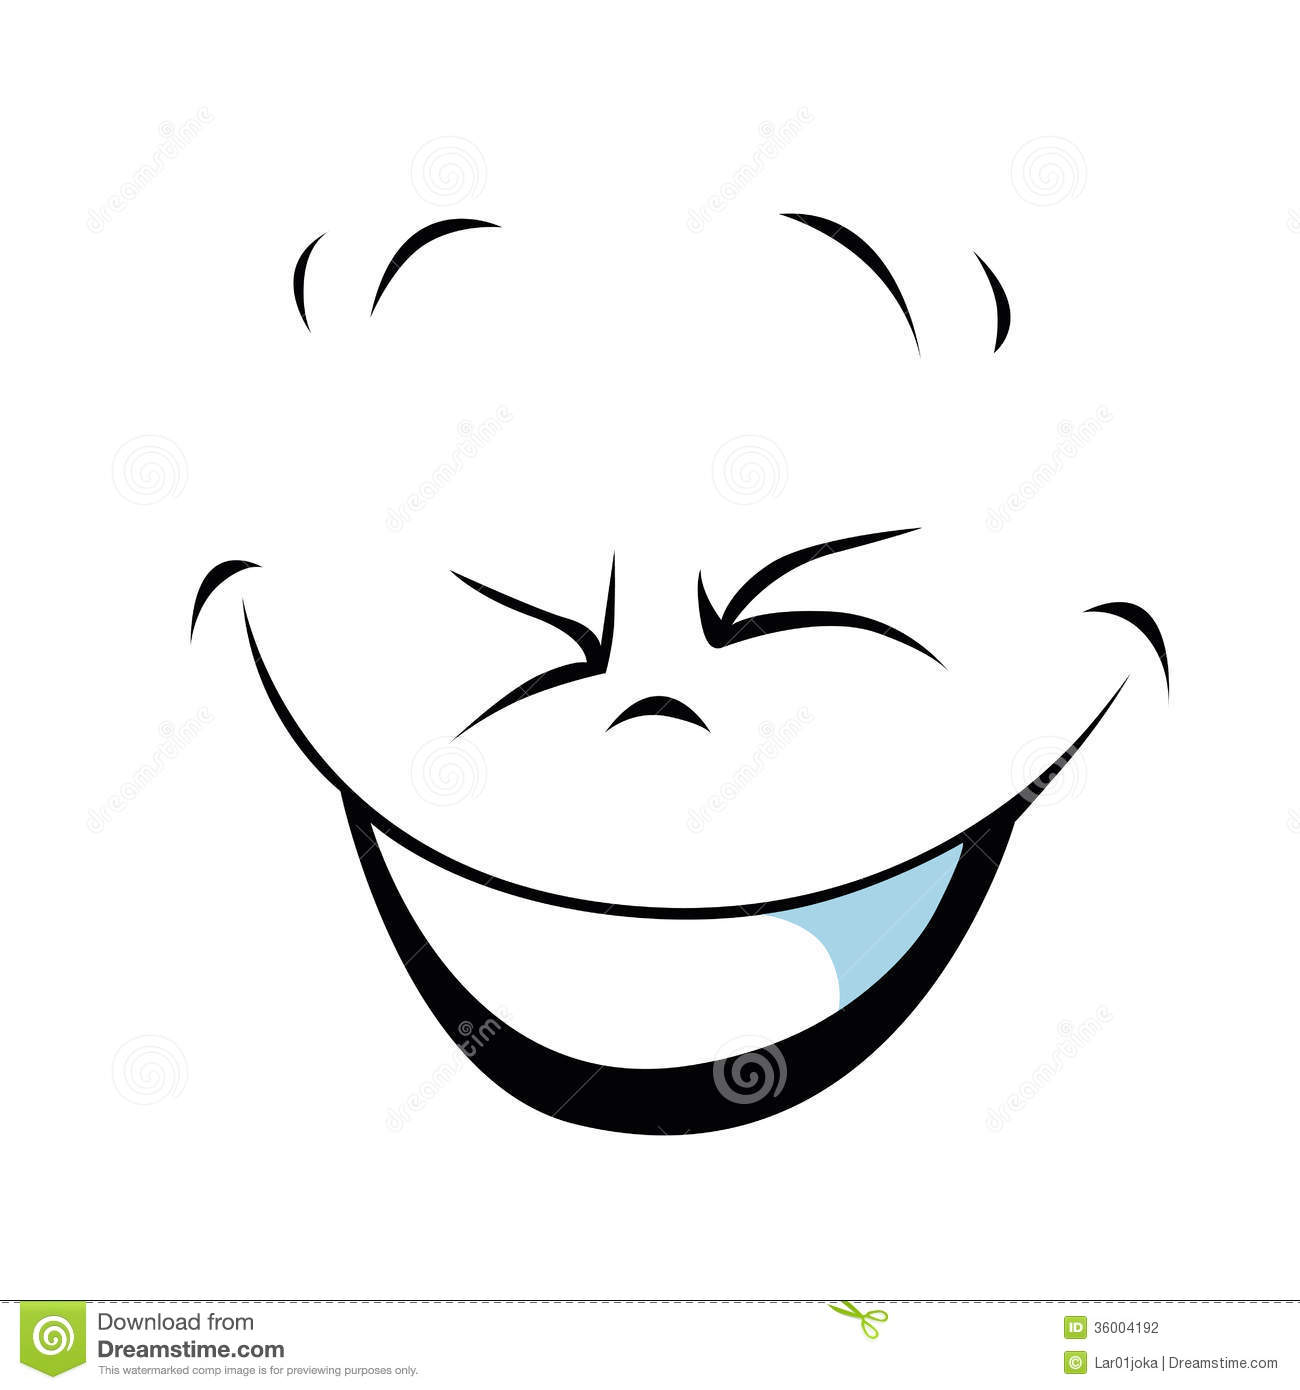 Smiley Face Black And White Laughing   Clipart Panda   Free Clipart